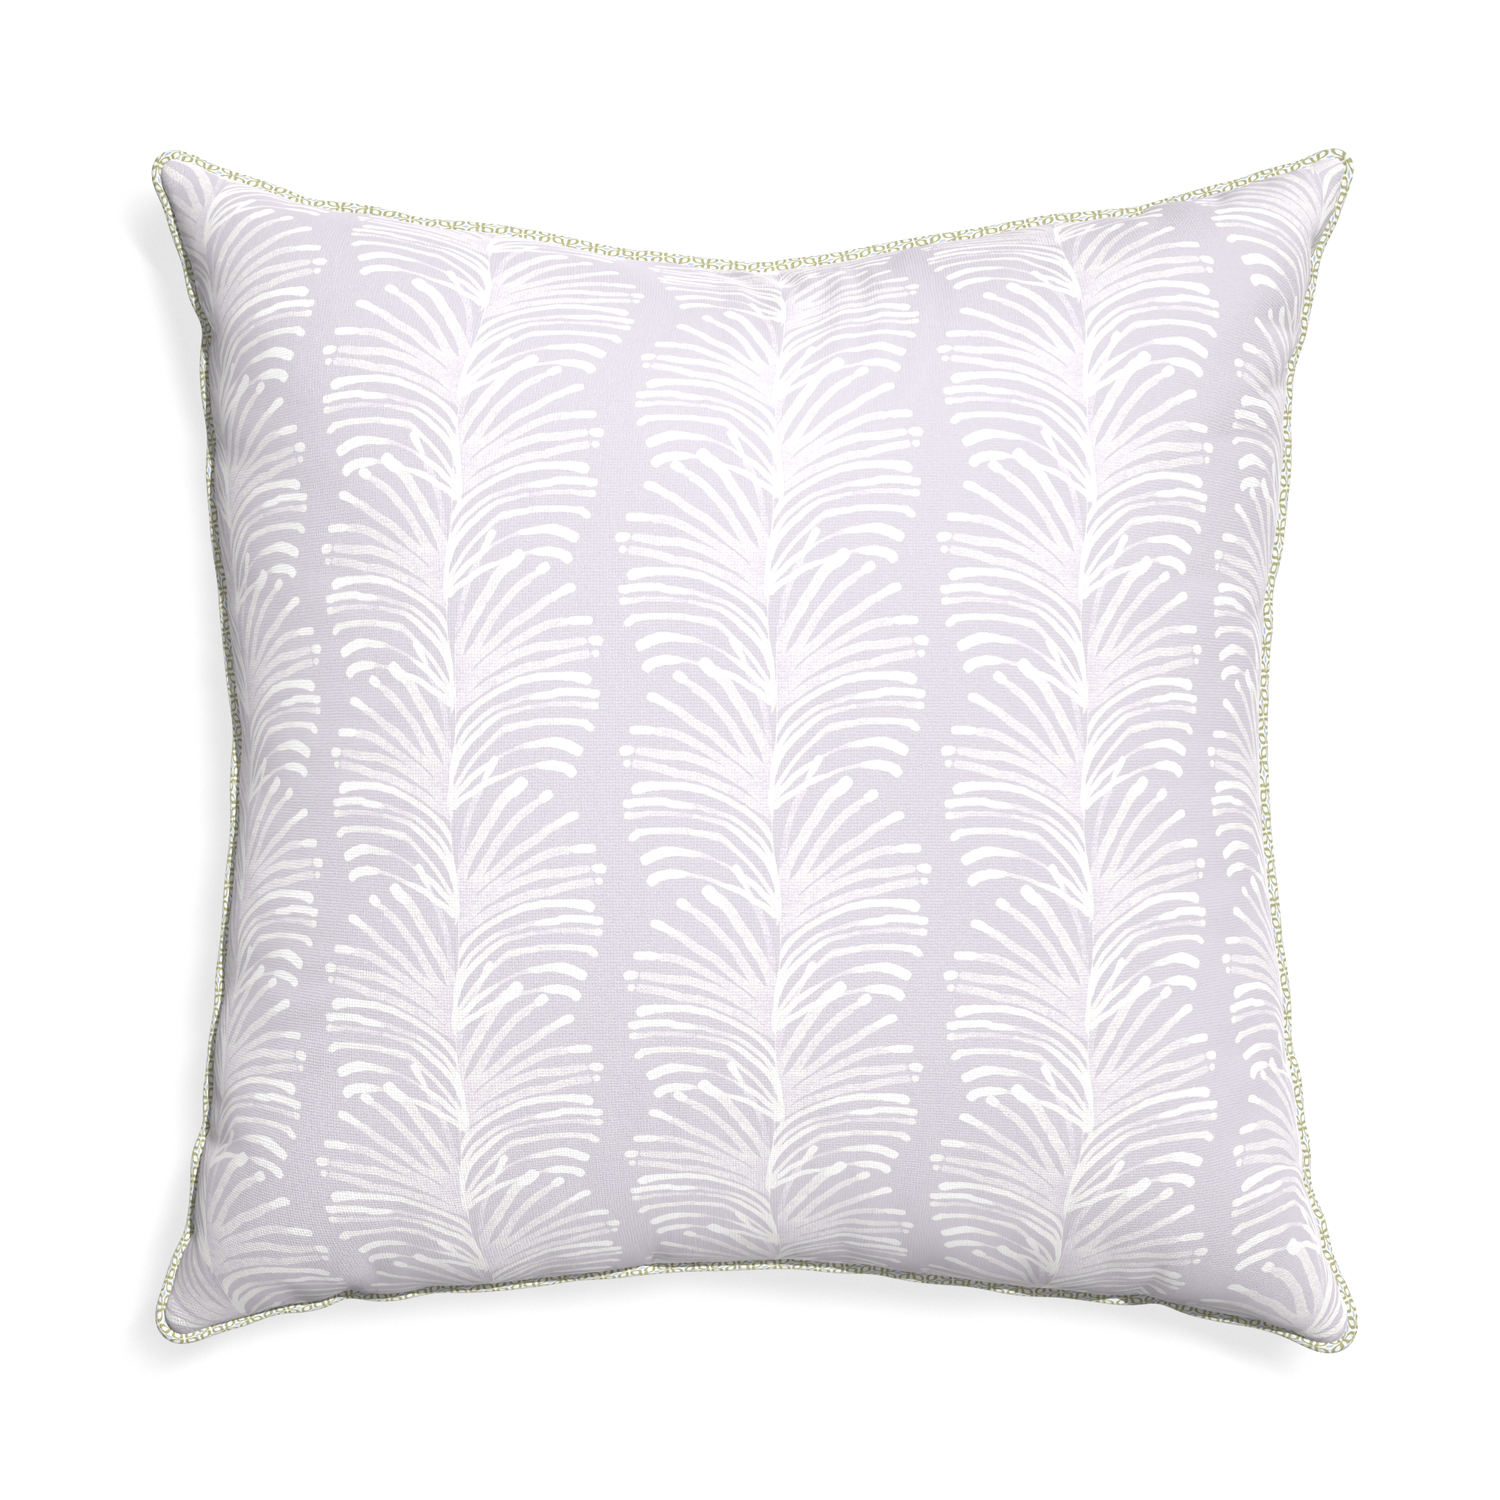 Euro-sham emma lavender custom pillow with l piping on white background